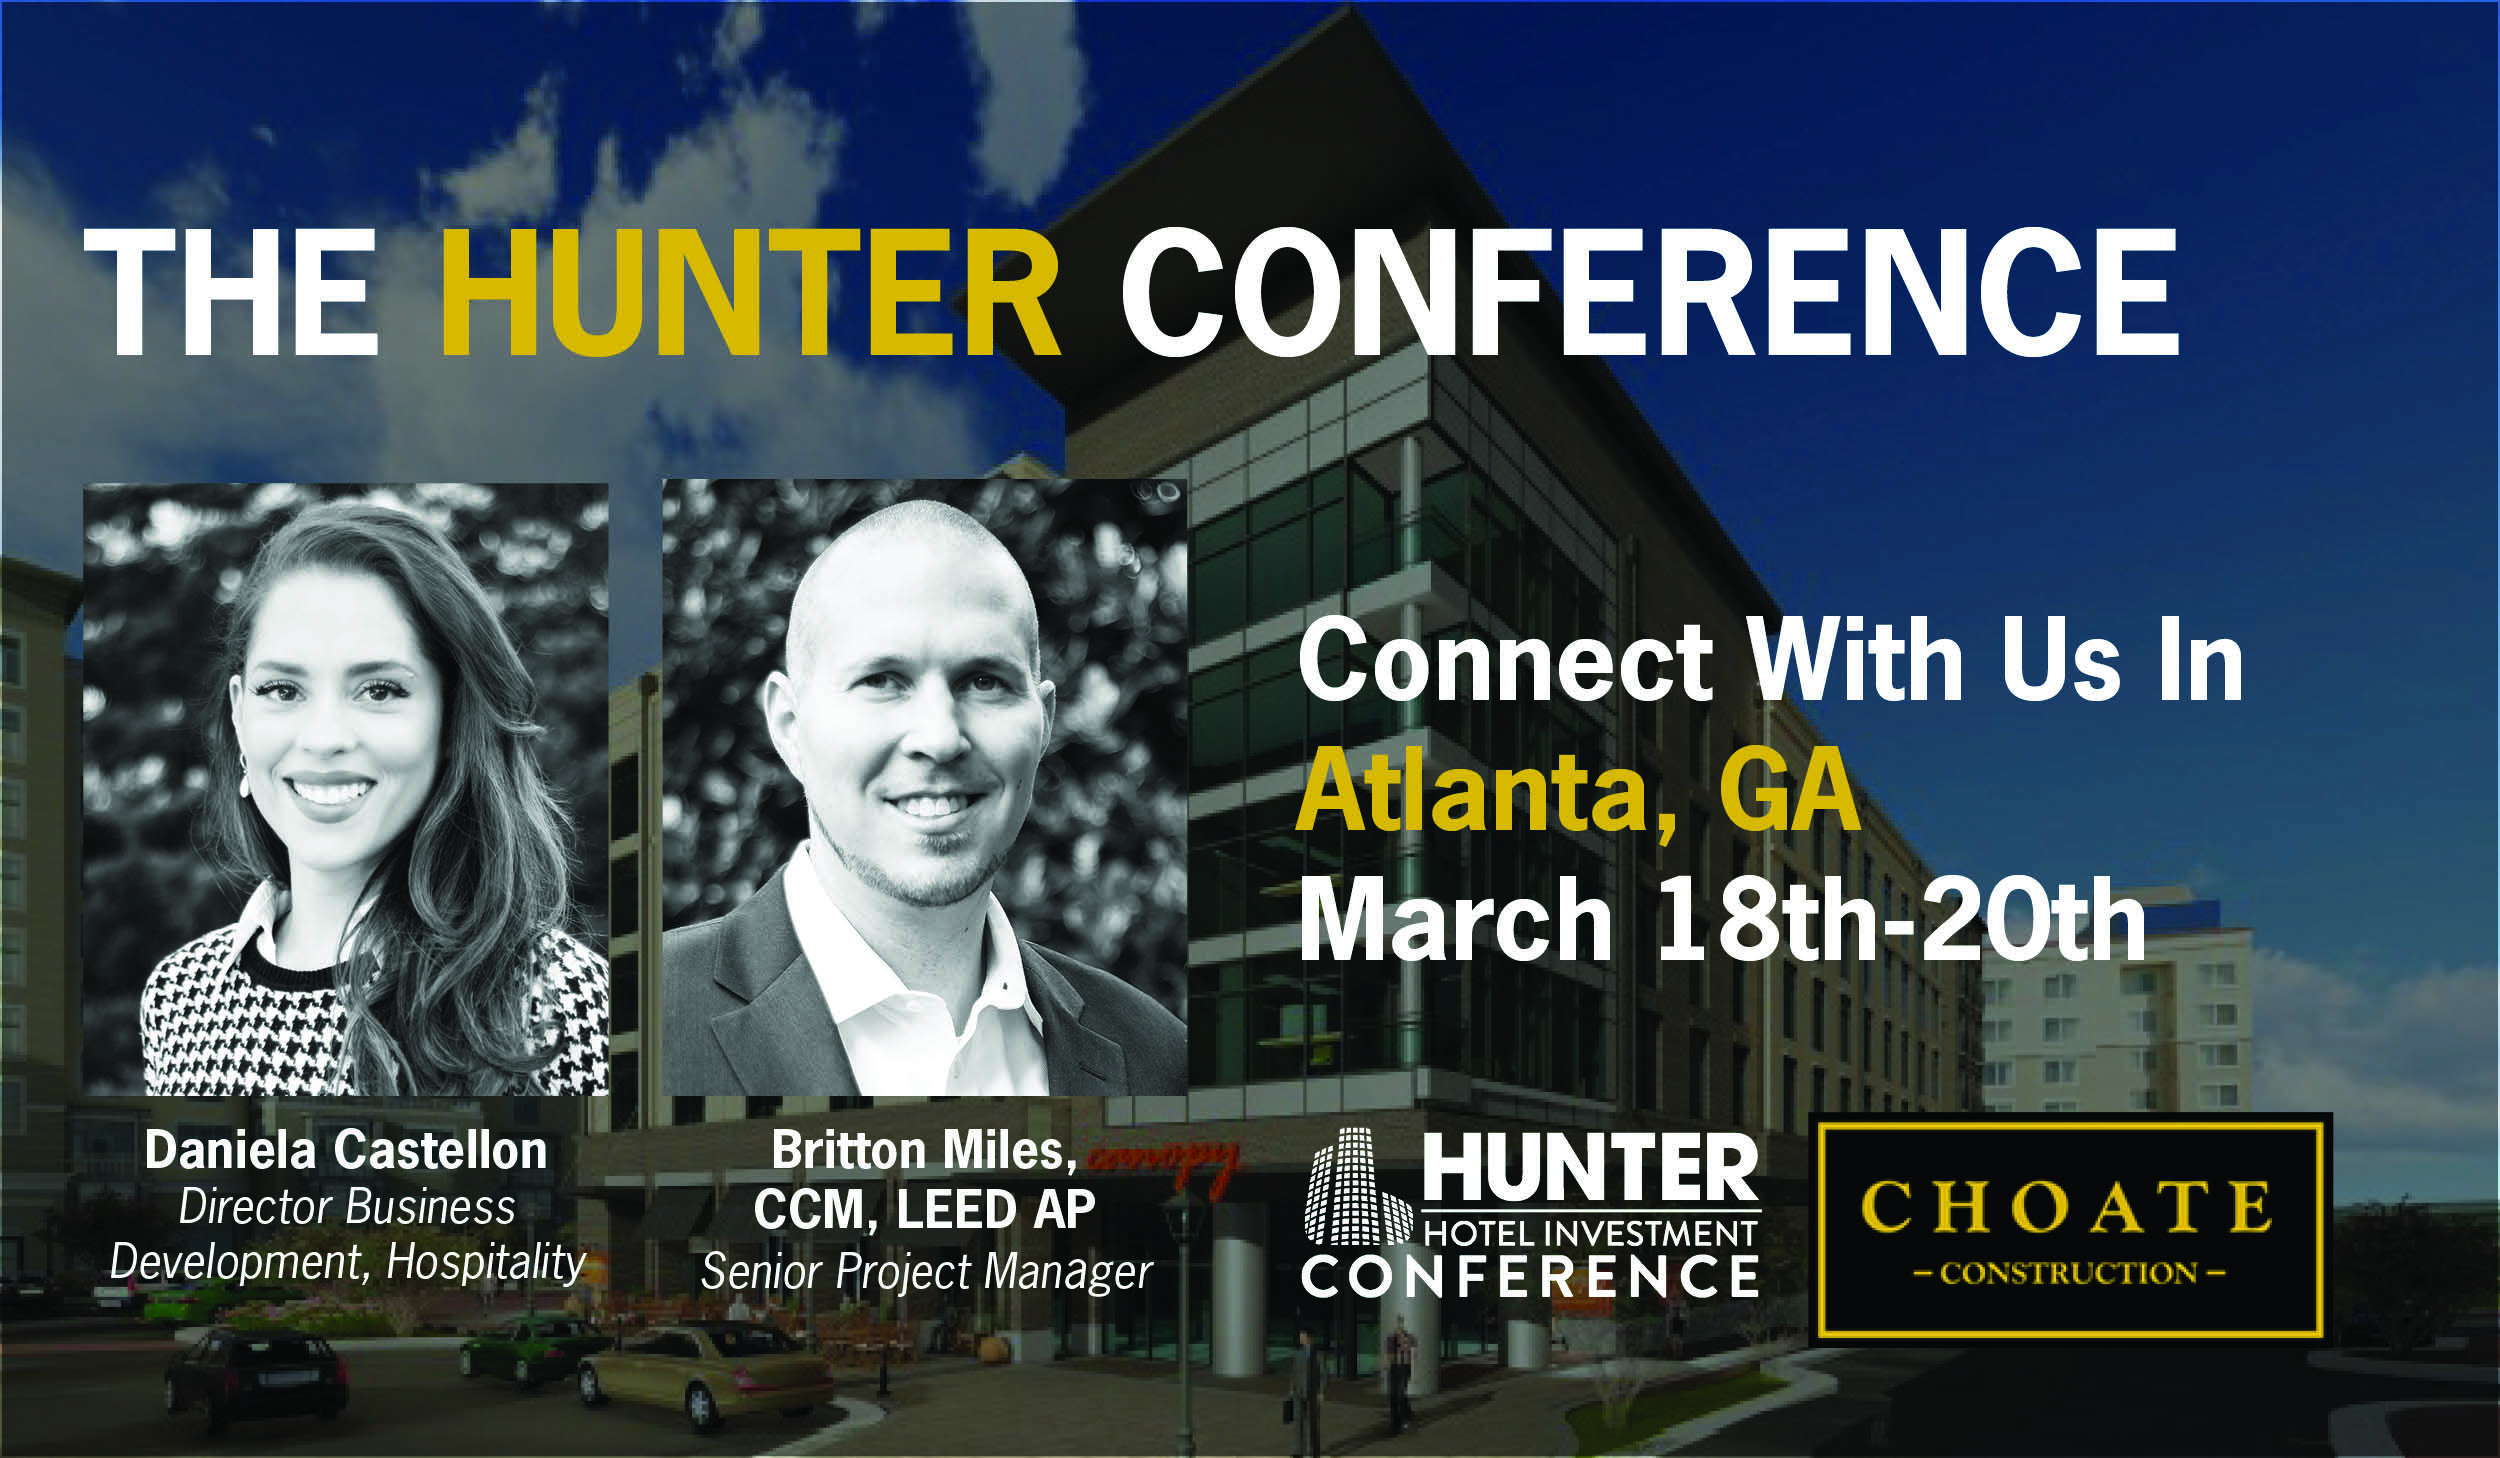 Hunter Hotel Conference News Choate Construction